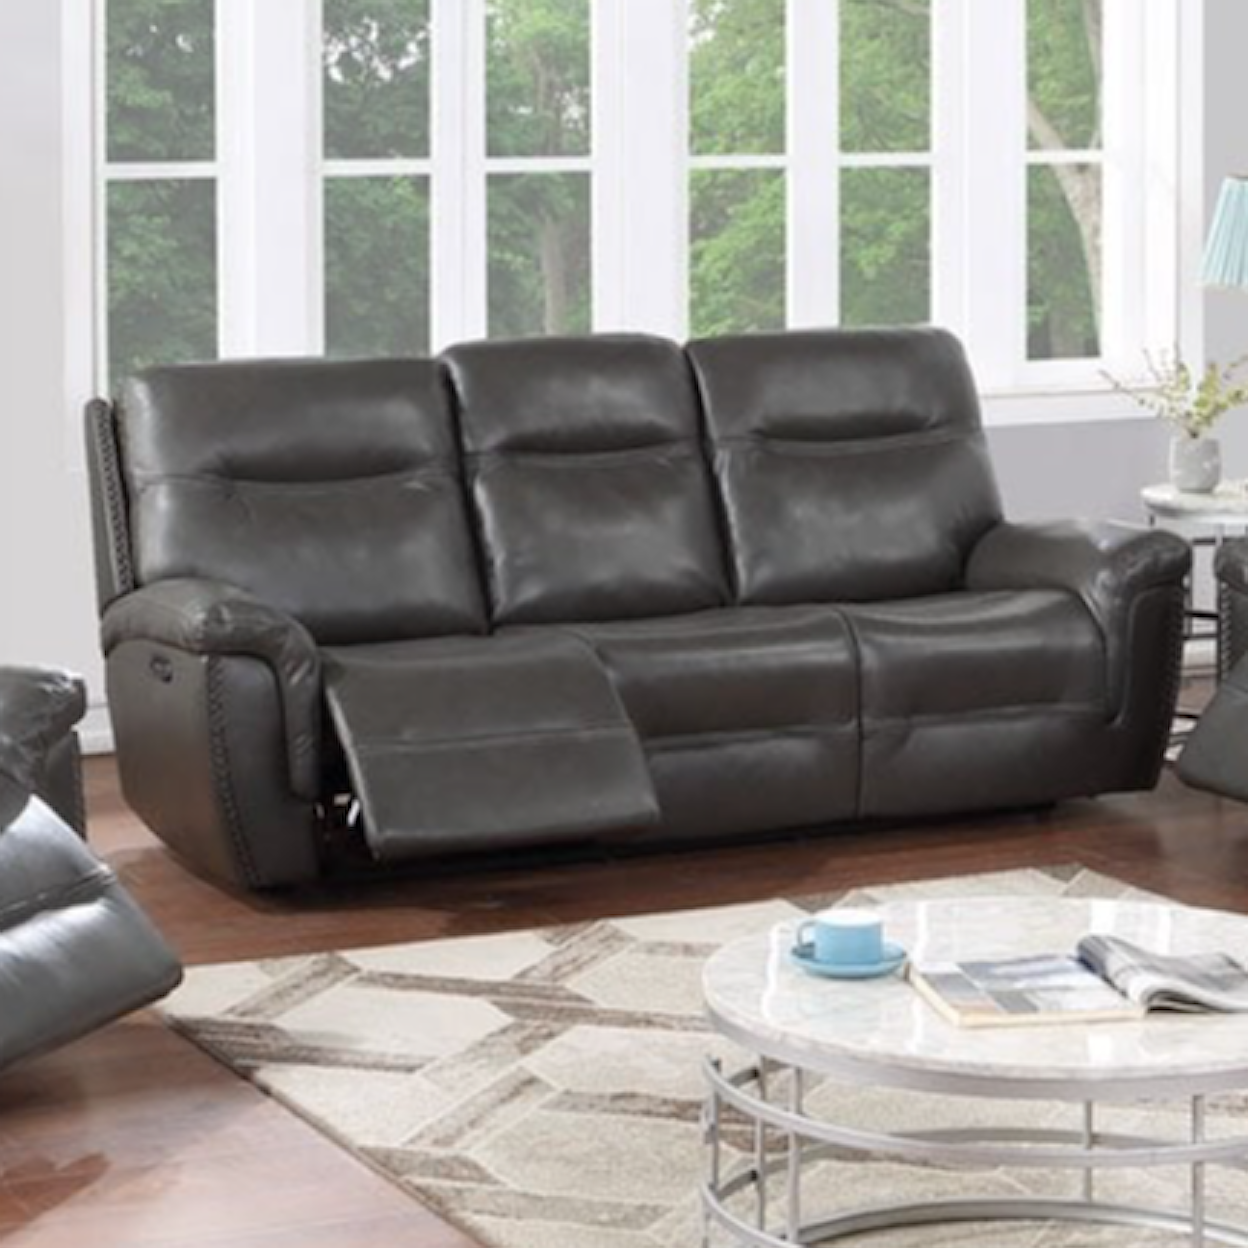 New Classic Stockwell Sofa and Loveseat Set